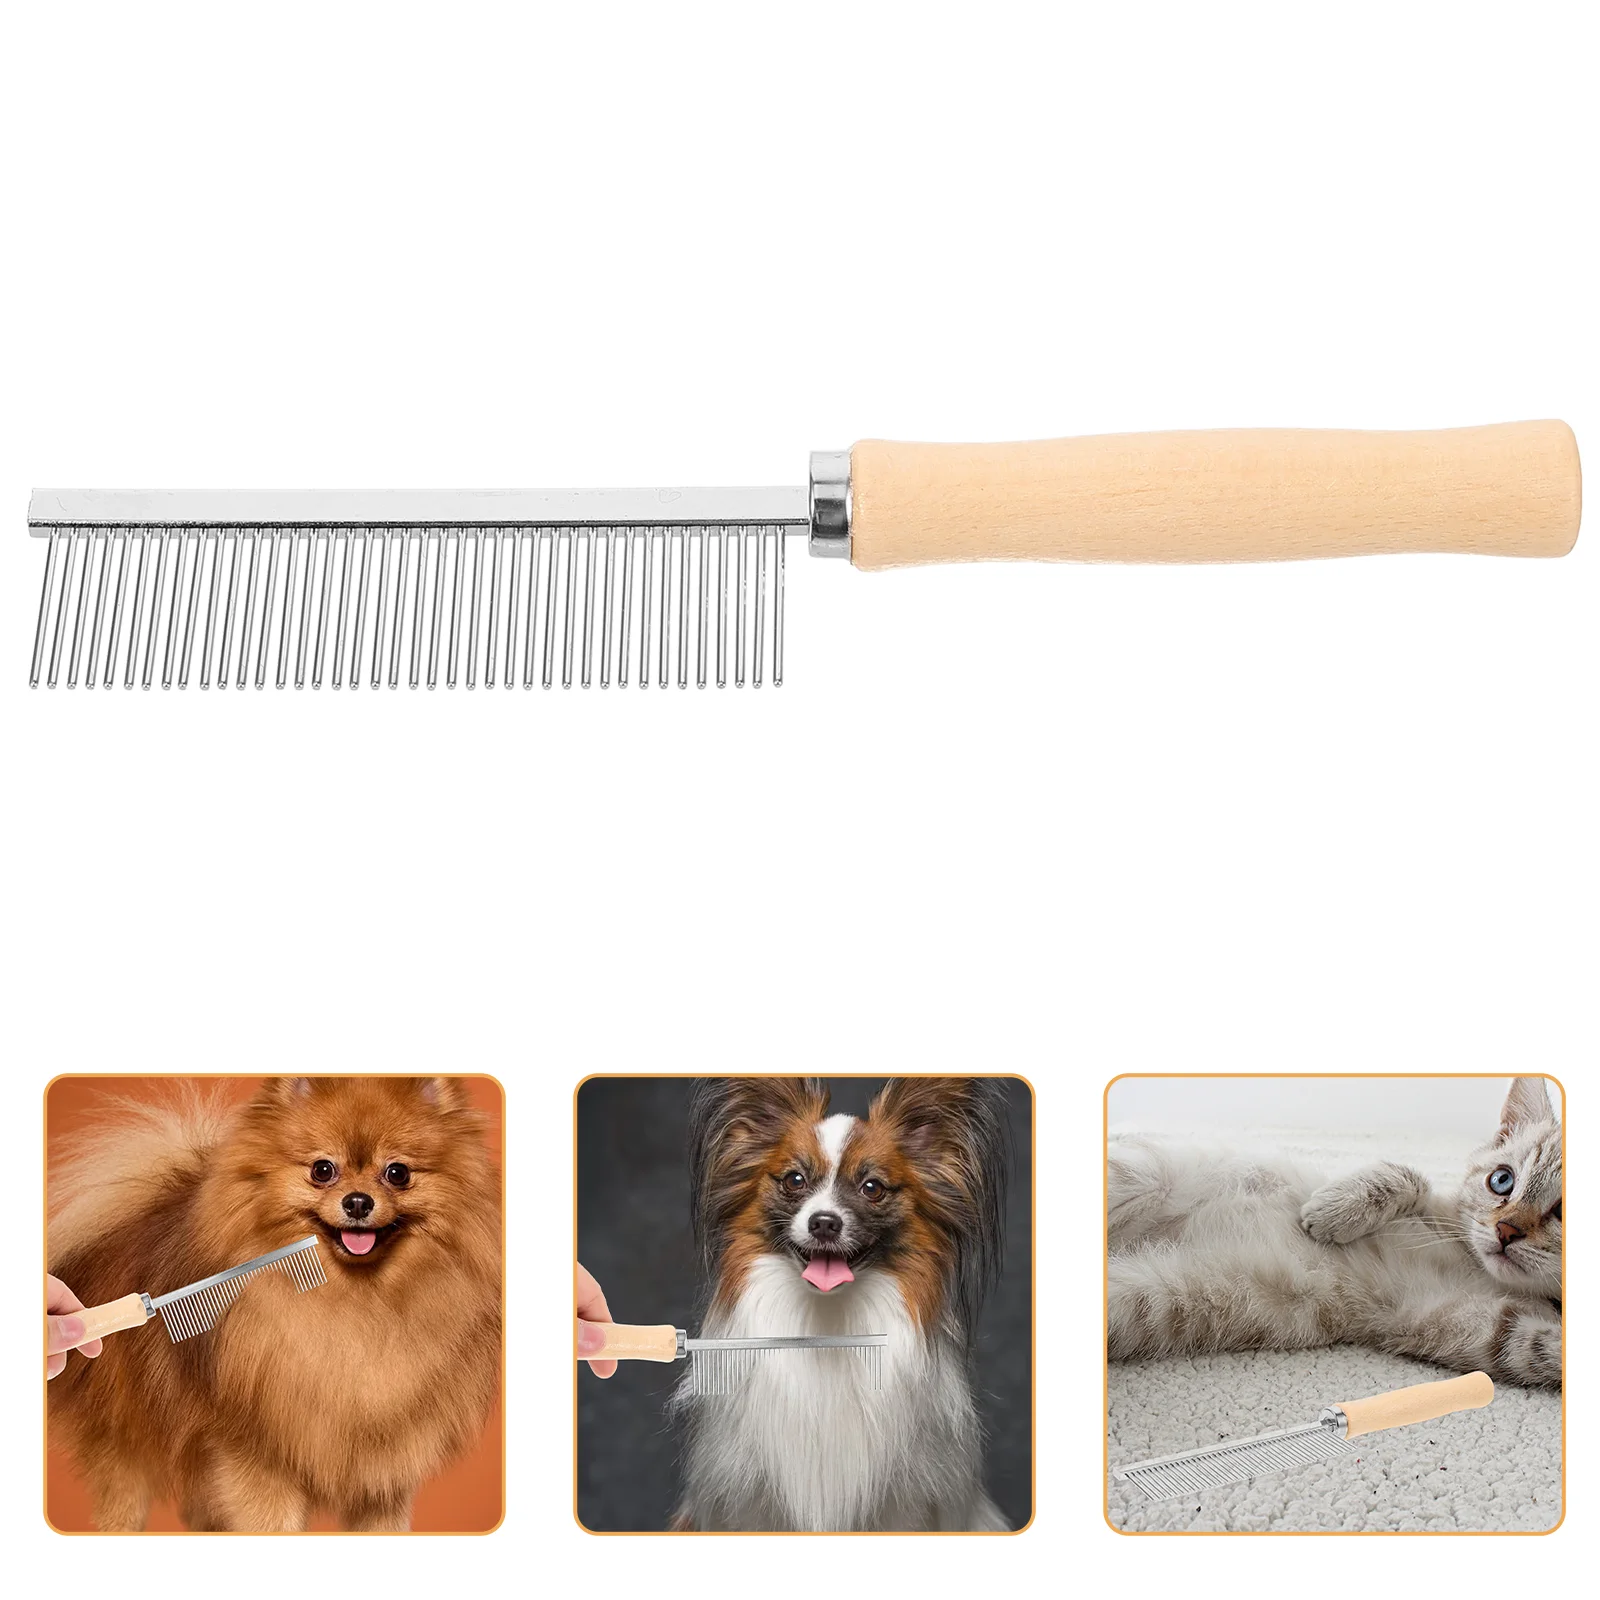 

Pet Cat Comb Wooden Handle Single Row Combing Smoothing Pets Supplies Dog Grooming Accessories Care for Shedding Professionl